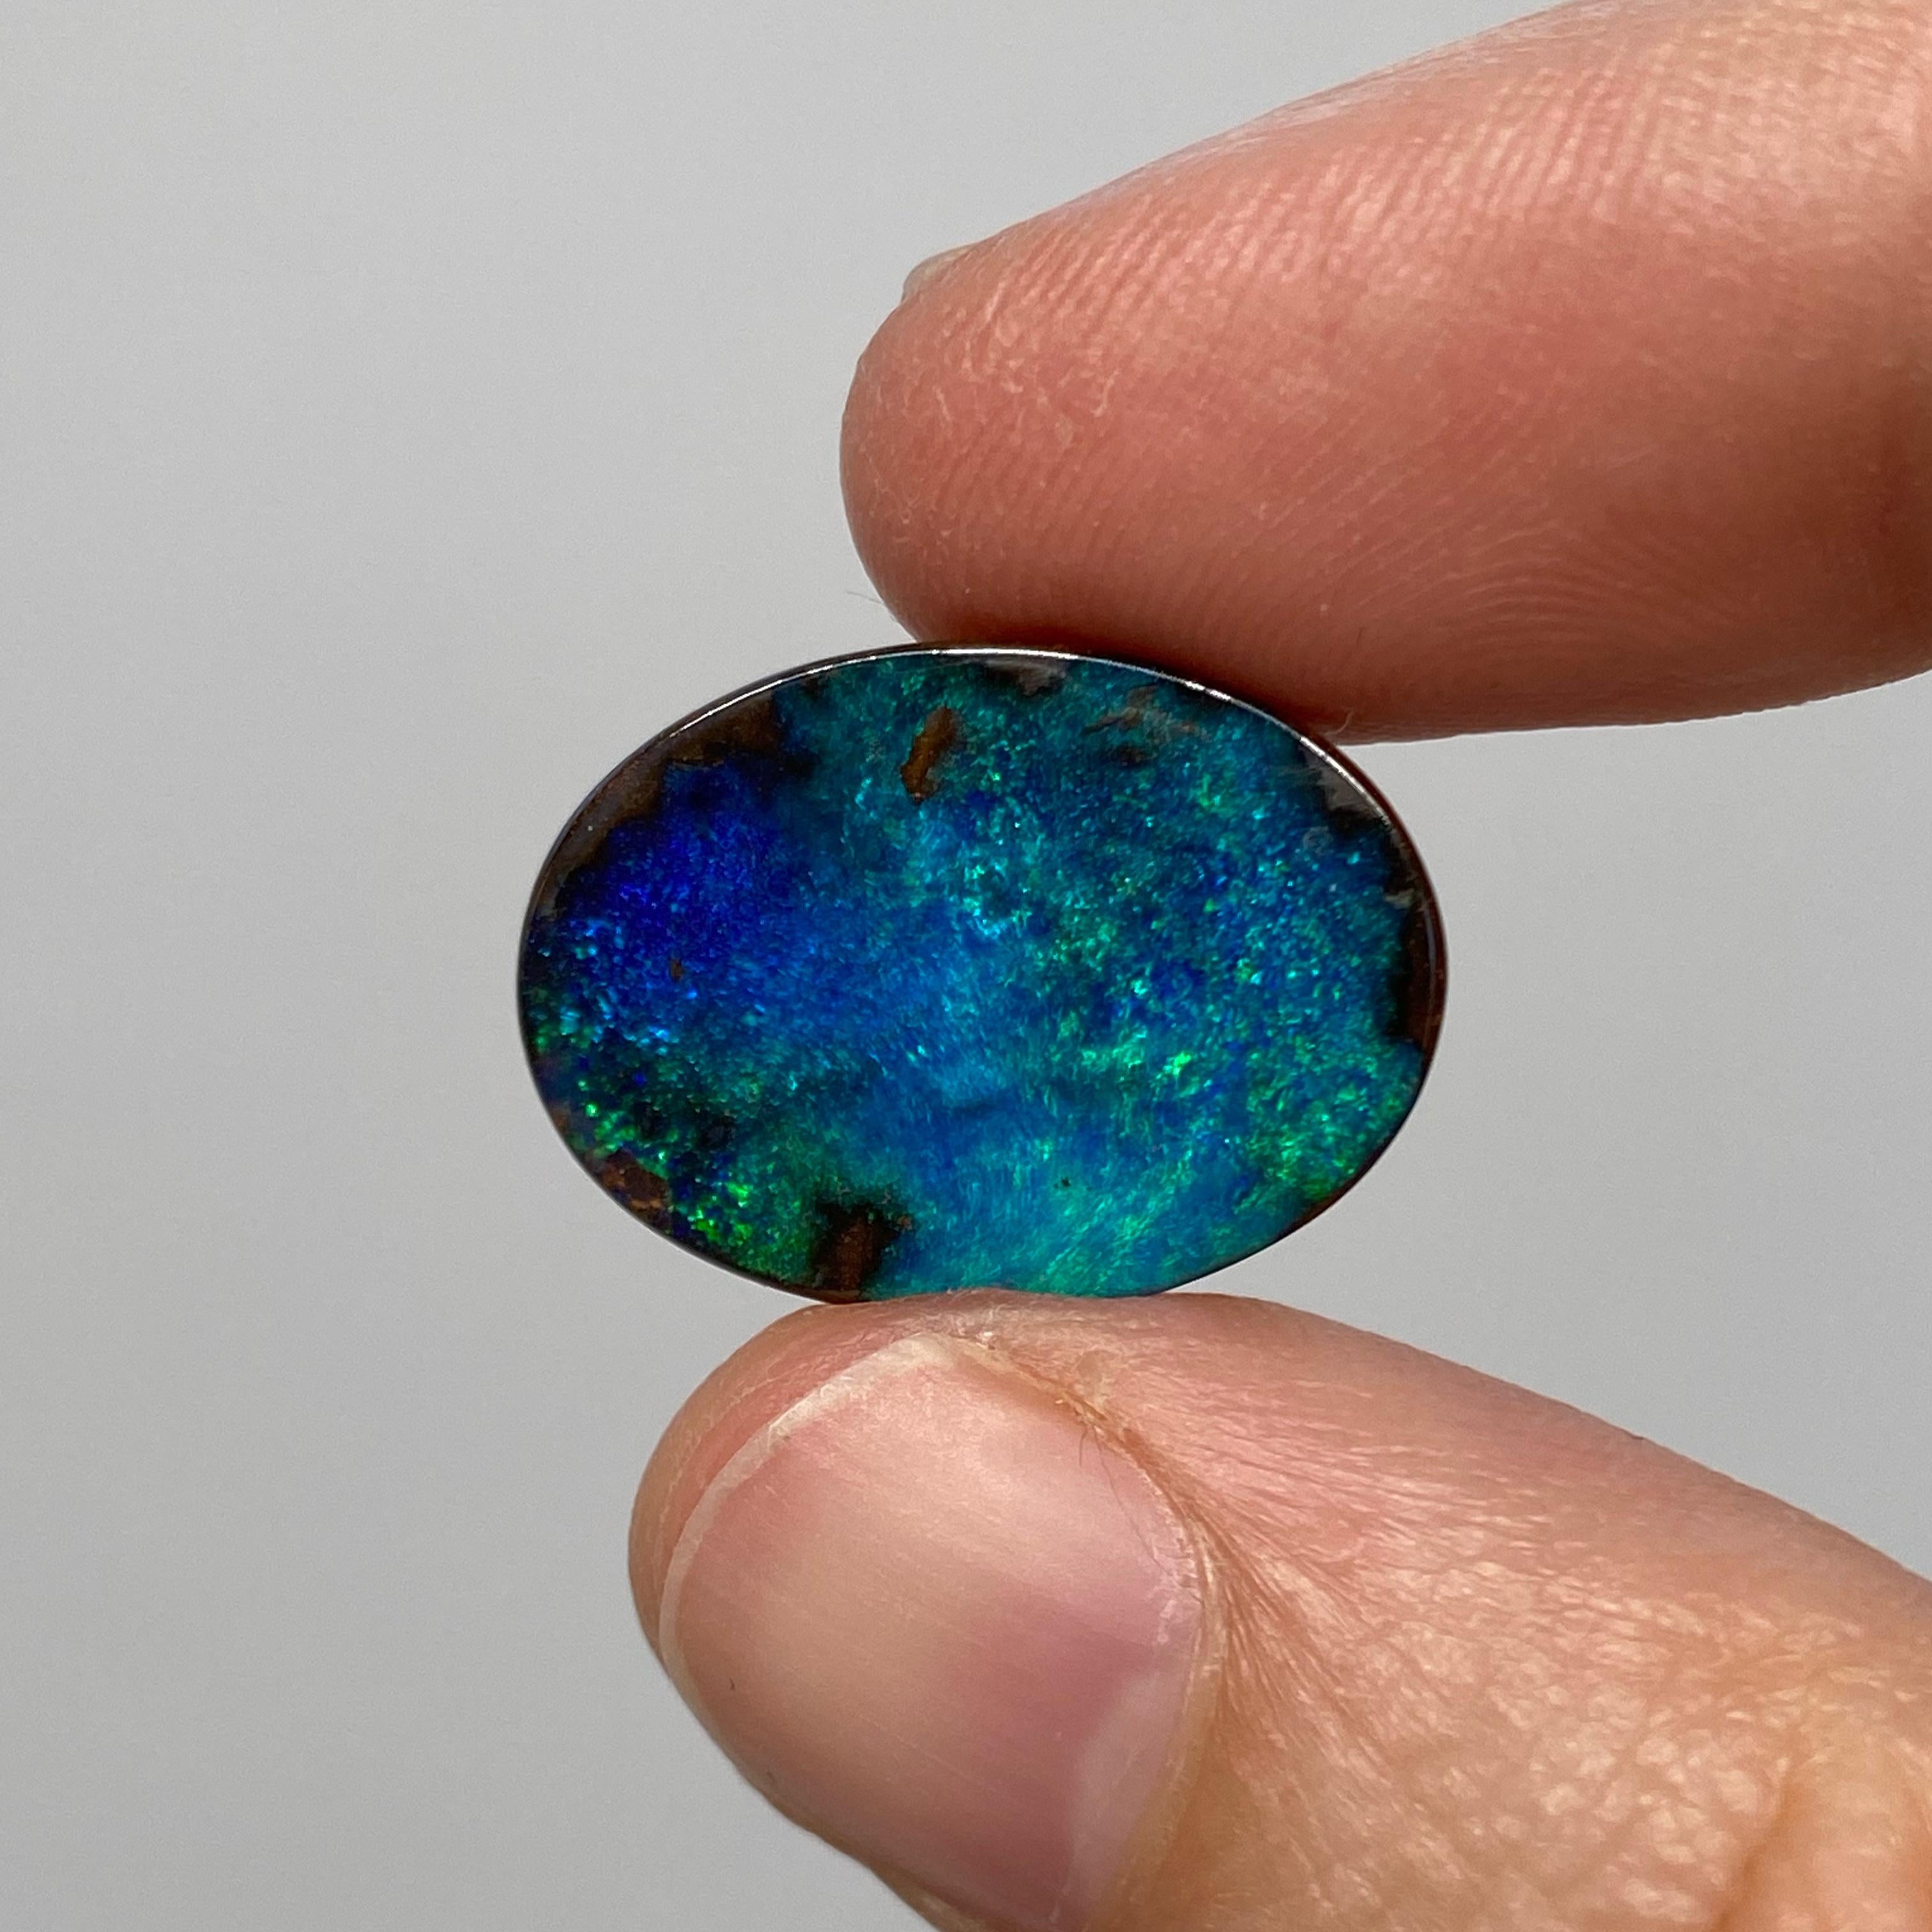 A lovely oval Australian boulder opal with darker green and blue colors. This natural solid Australian boulder opal was mined in western Queensland, Australia by a female opal miner. It has gorgeous green and blue colors and a pinfire-like pattern.